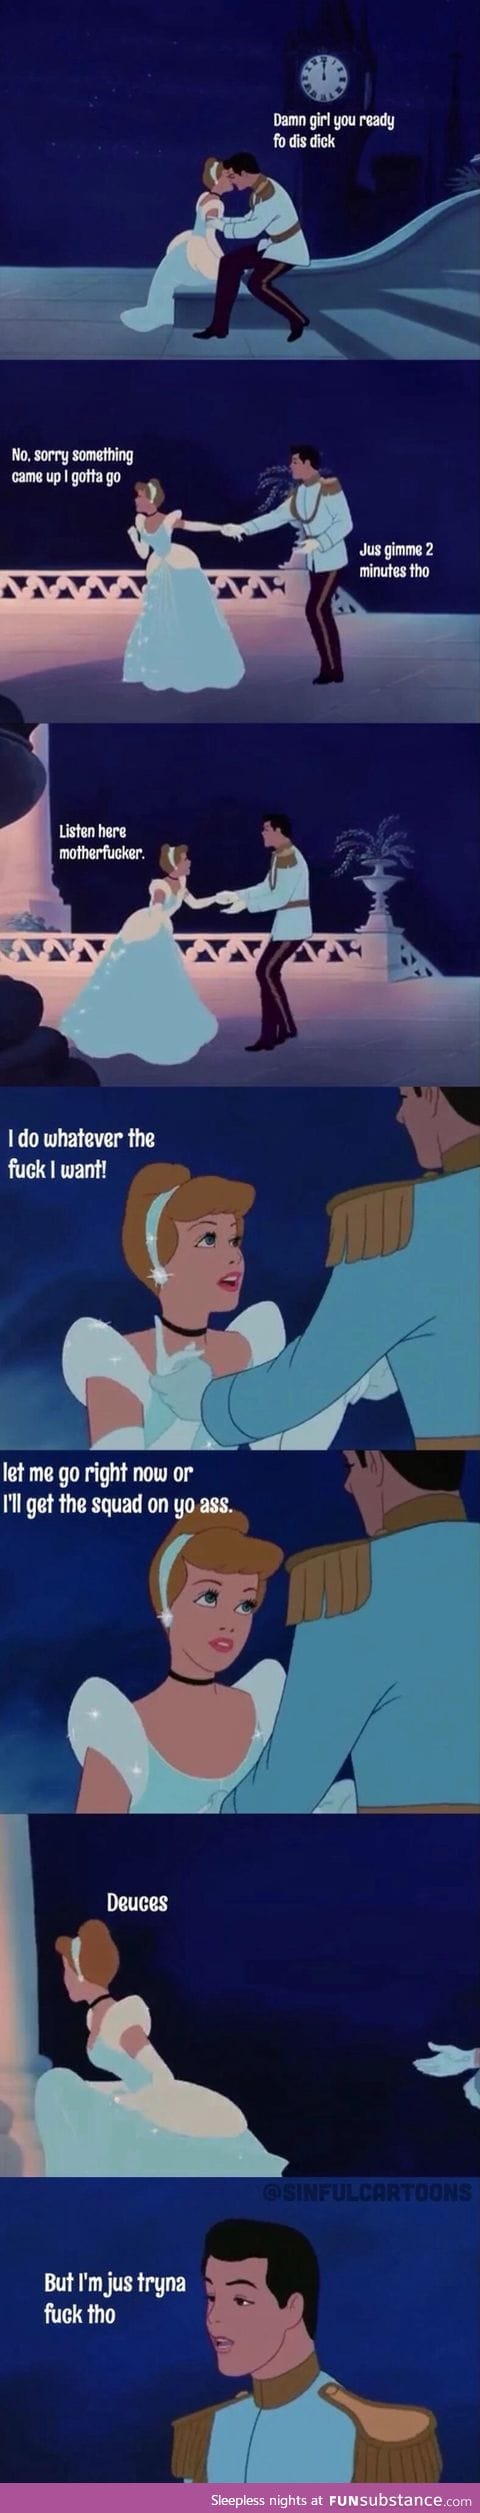 In observance of the new Cinderella movie